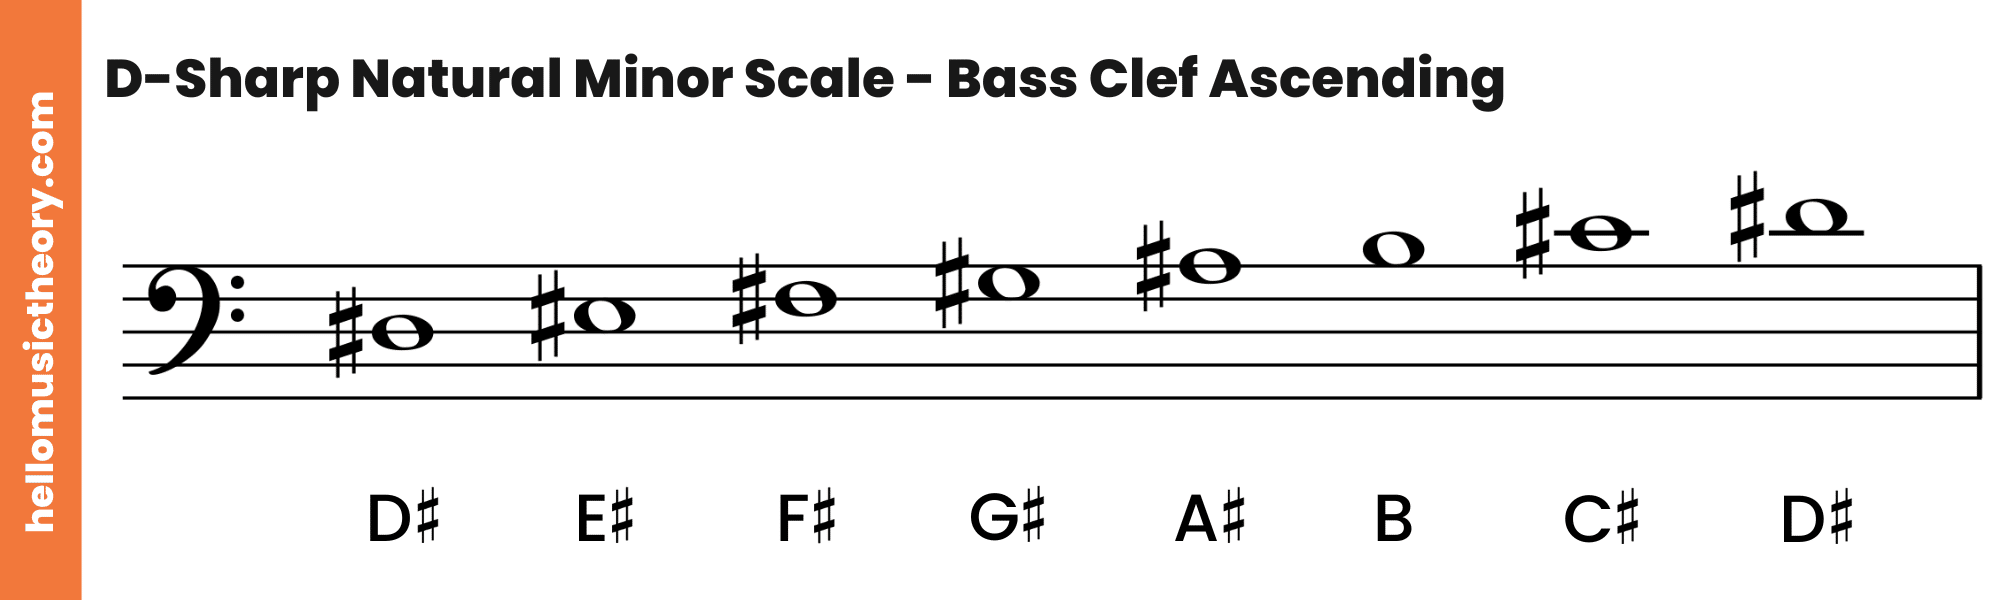 D-Sharp Natural Minor Scale Bass Clef Ascending